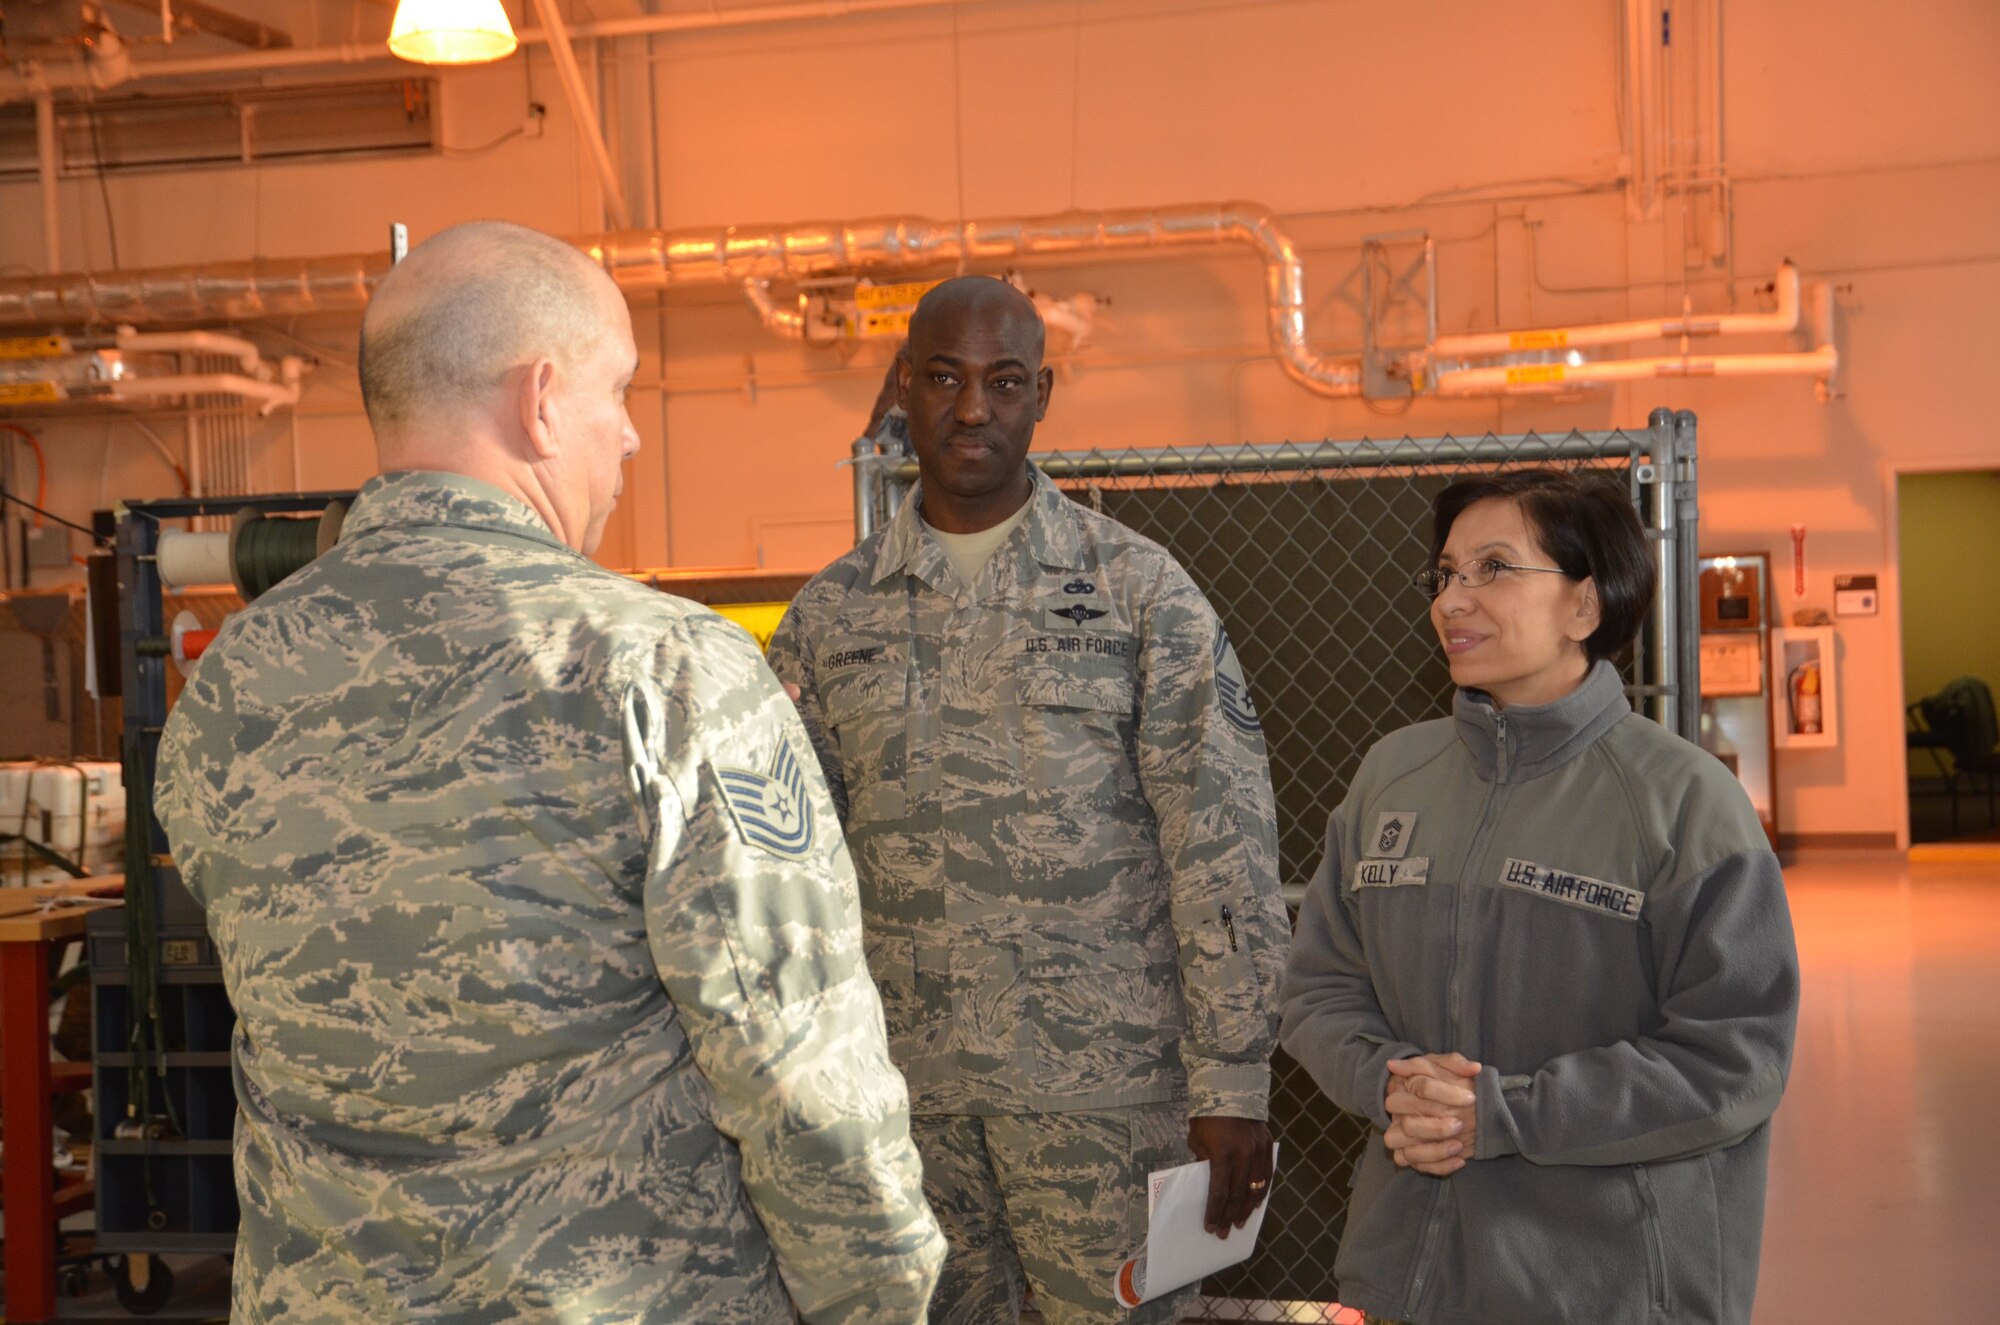 Chief Master Sgt. Ericka Kelly, Air Force Reserve Command command chief master sergeant, speaks to aerial porters at Dobbins Air Reserve Base, Ga, Jan. 6, 2018. Kelly visited Dobbins to tour the base and visit the units, as well as host question and answer sessions. (U.S. Air Force photo by Senior Airman Lauren Douglas)